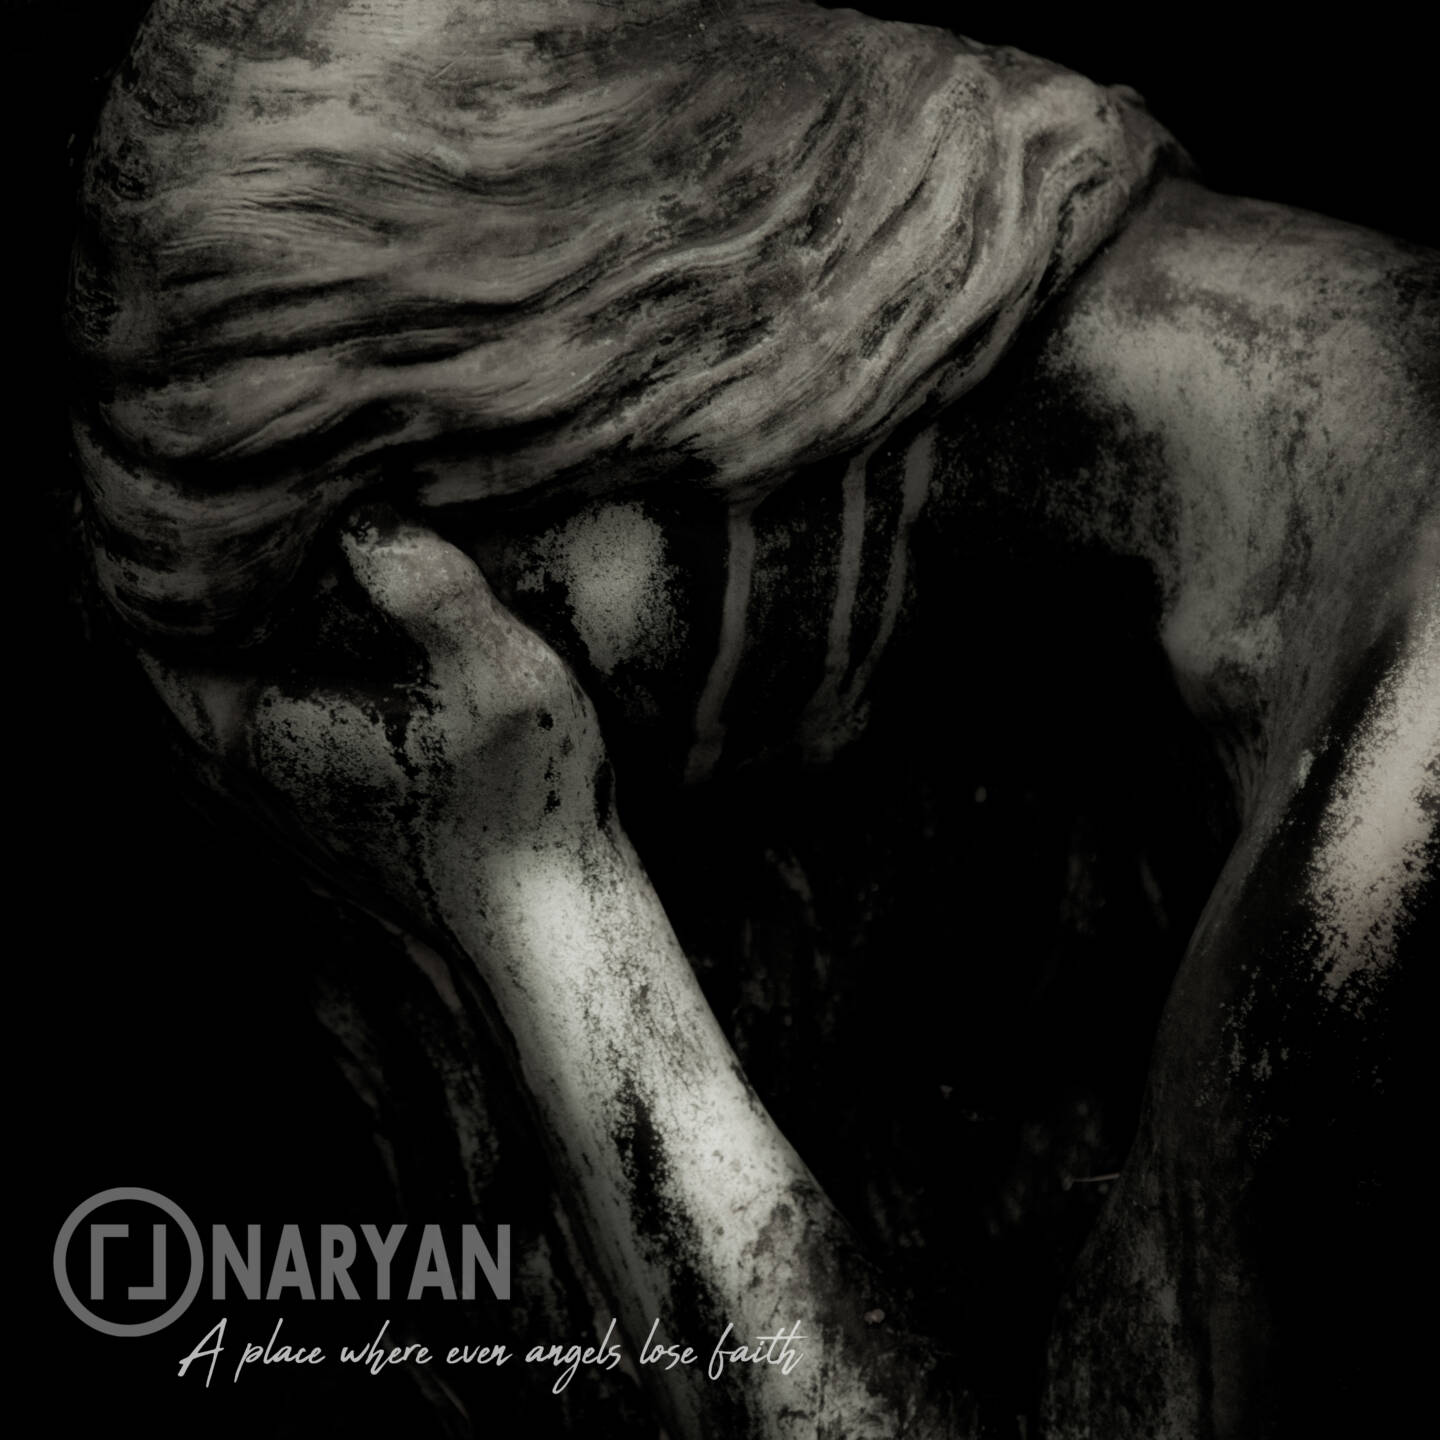 Naryan present heartfelt new song “A Place Where Even Angels Lose Faith”